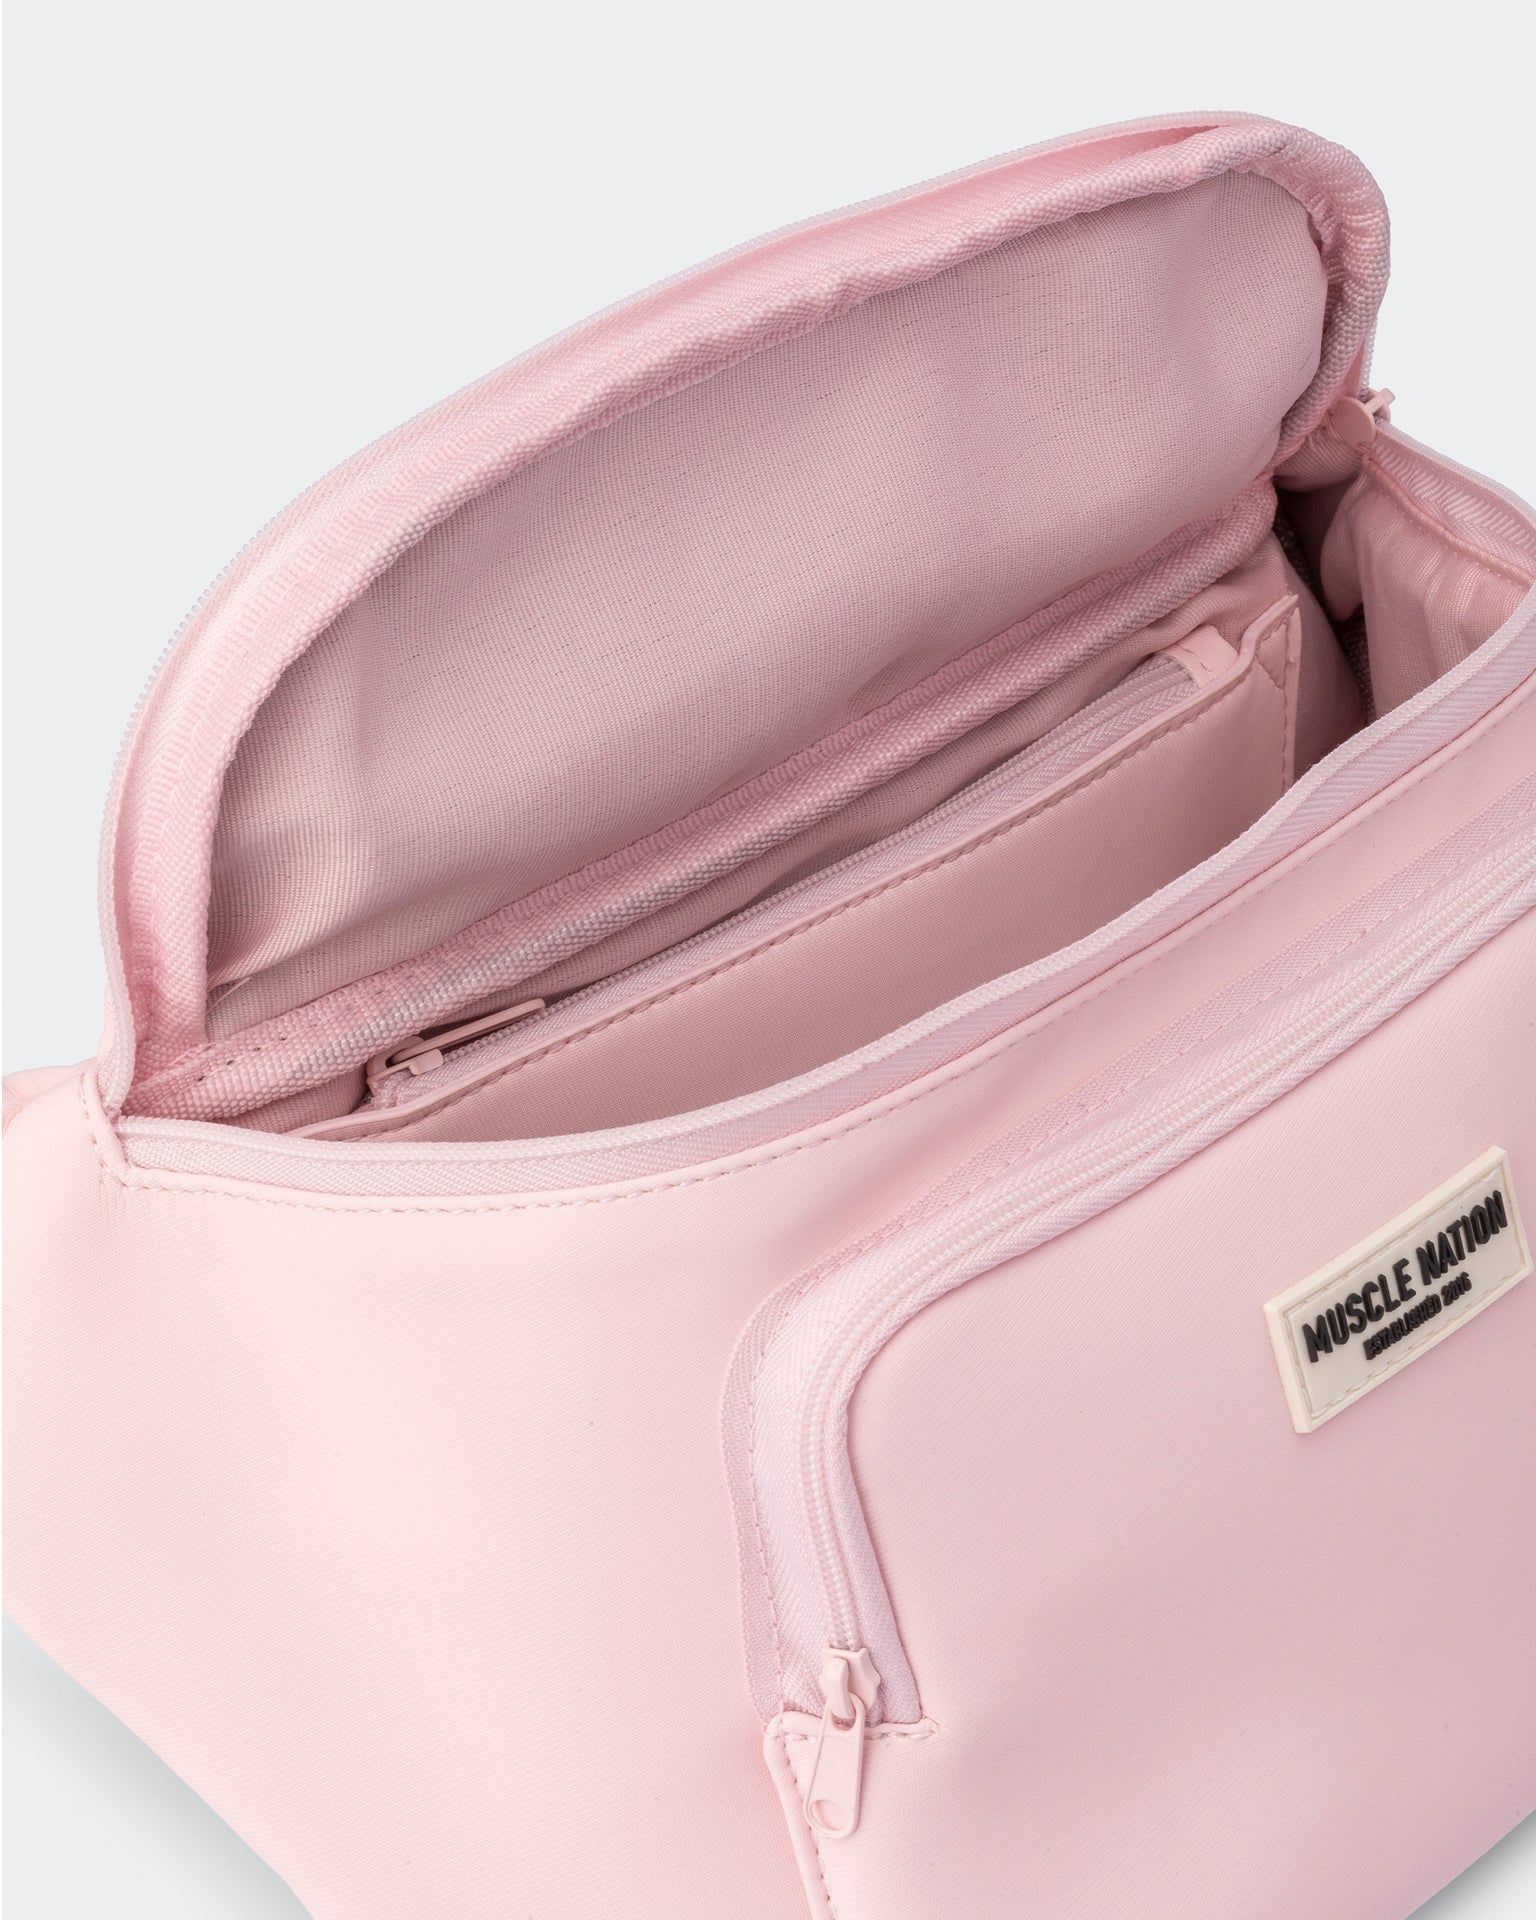 Muscle Nation Bags Default Cross Body Bag - Pale Pink